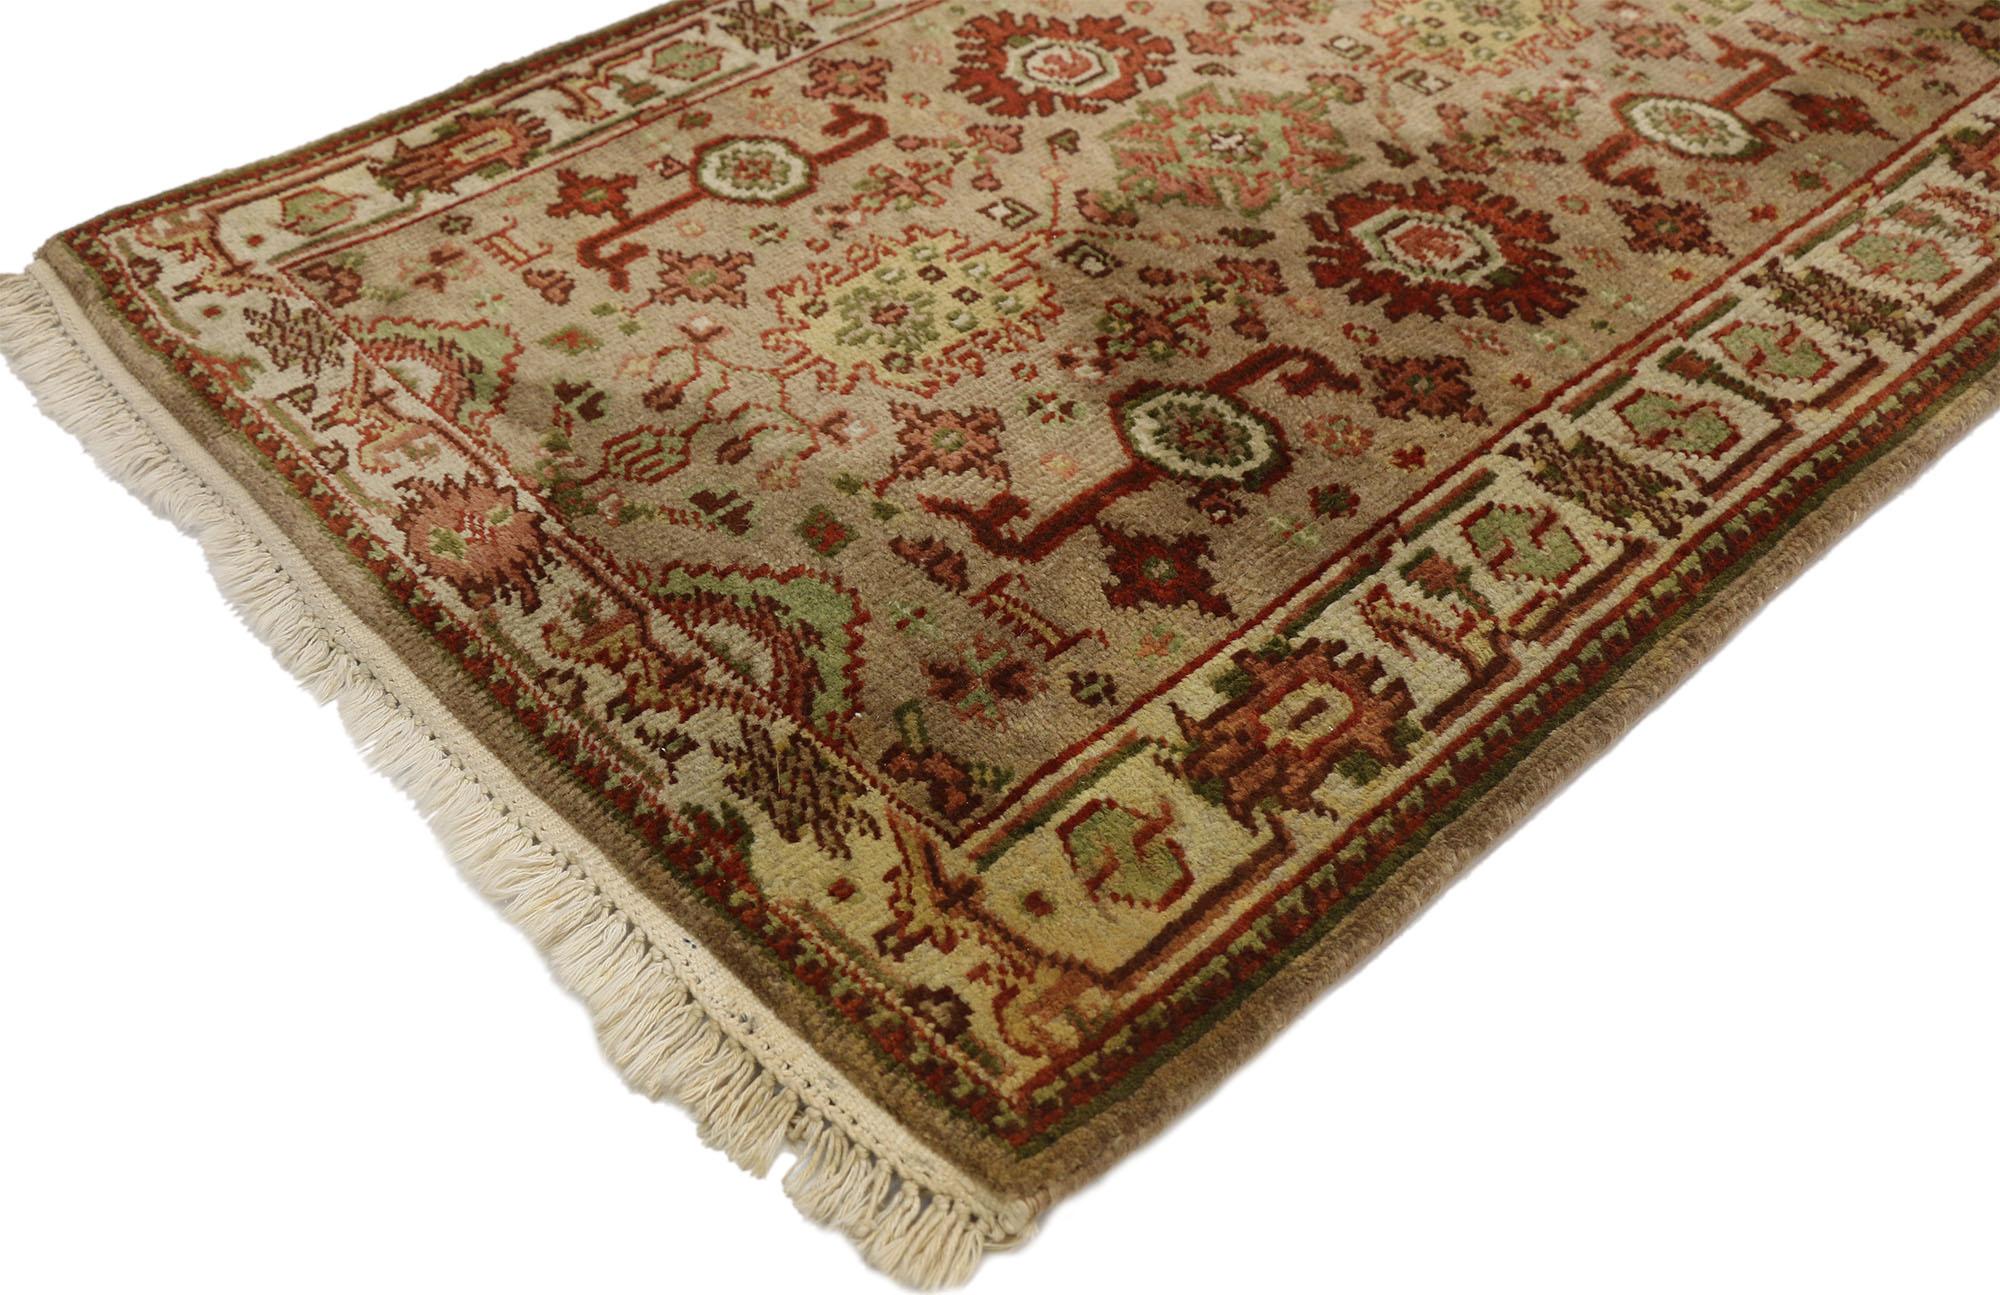 77312, vintage Indian runner with Rustic Arts & Crafts style, short hallway runner. With its earthy colors and understated elegance, this hand knotted wool vintage Indian runner charms with ease and seamlessly melds into rustic Arts & Crafts style